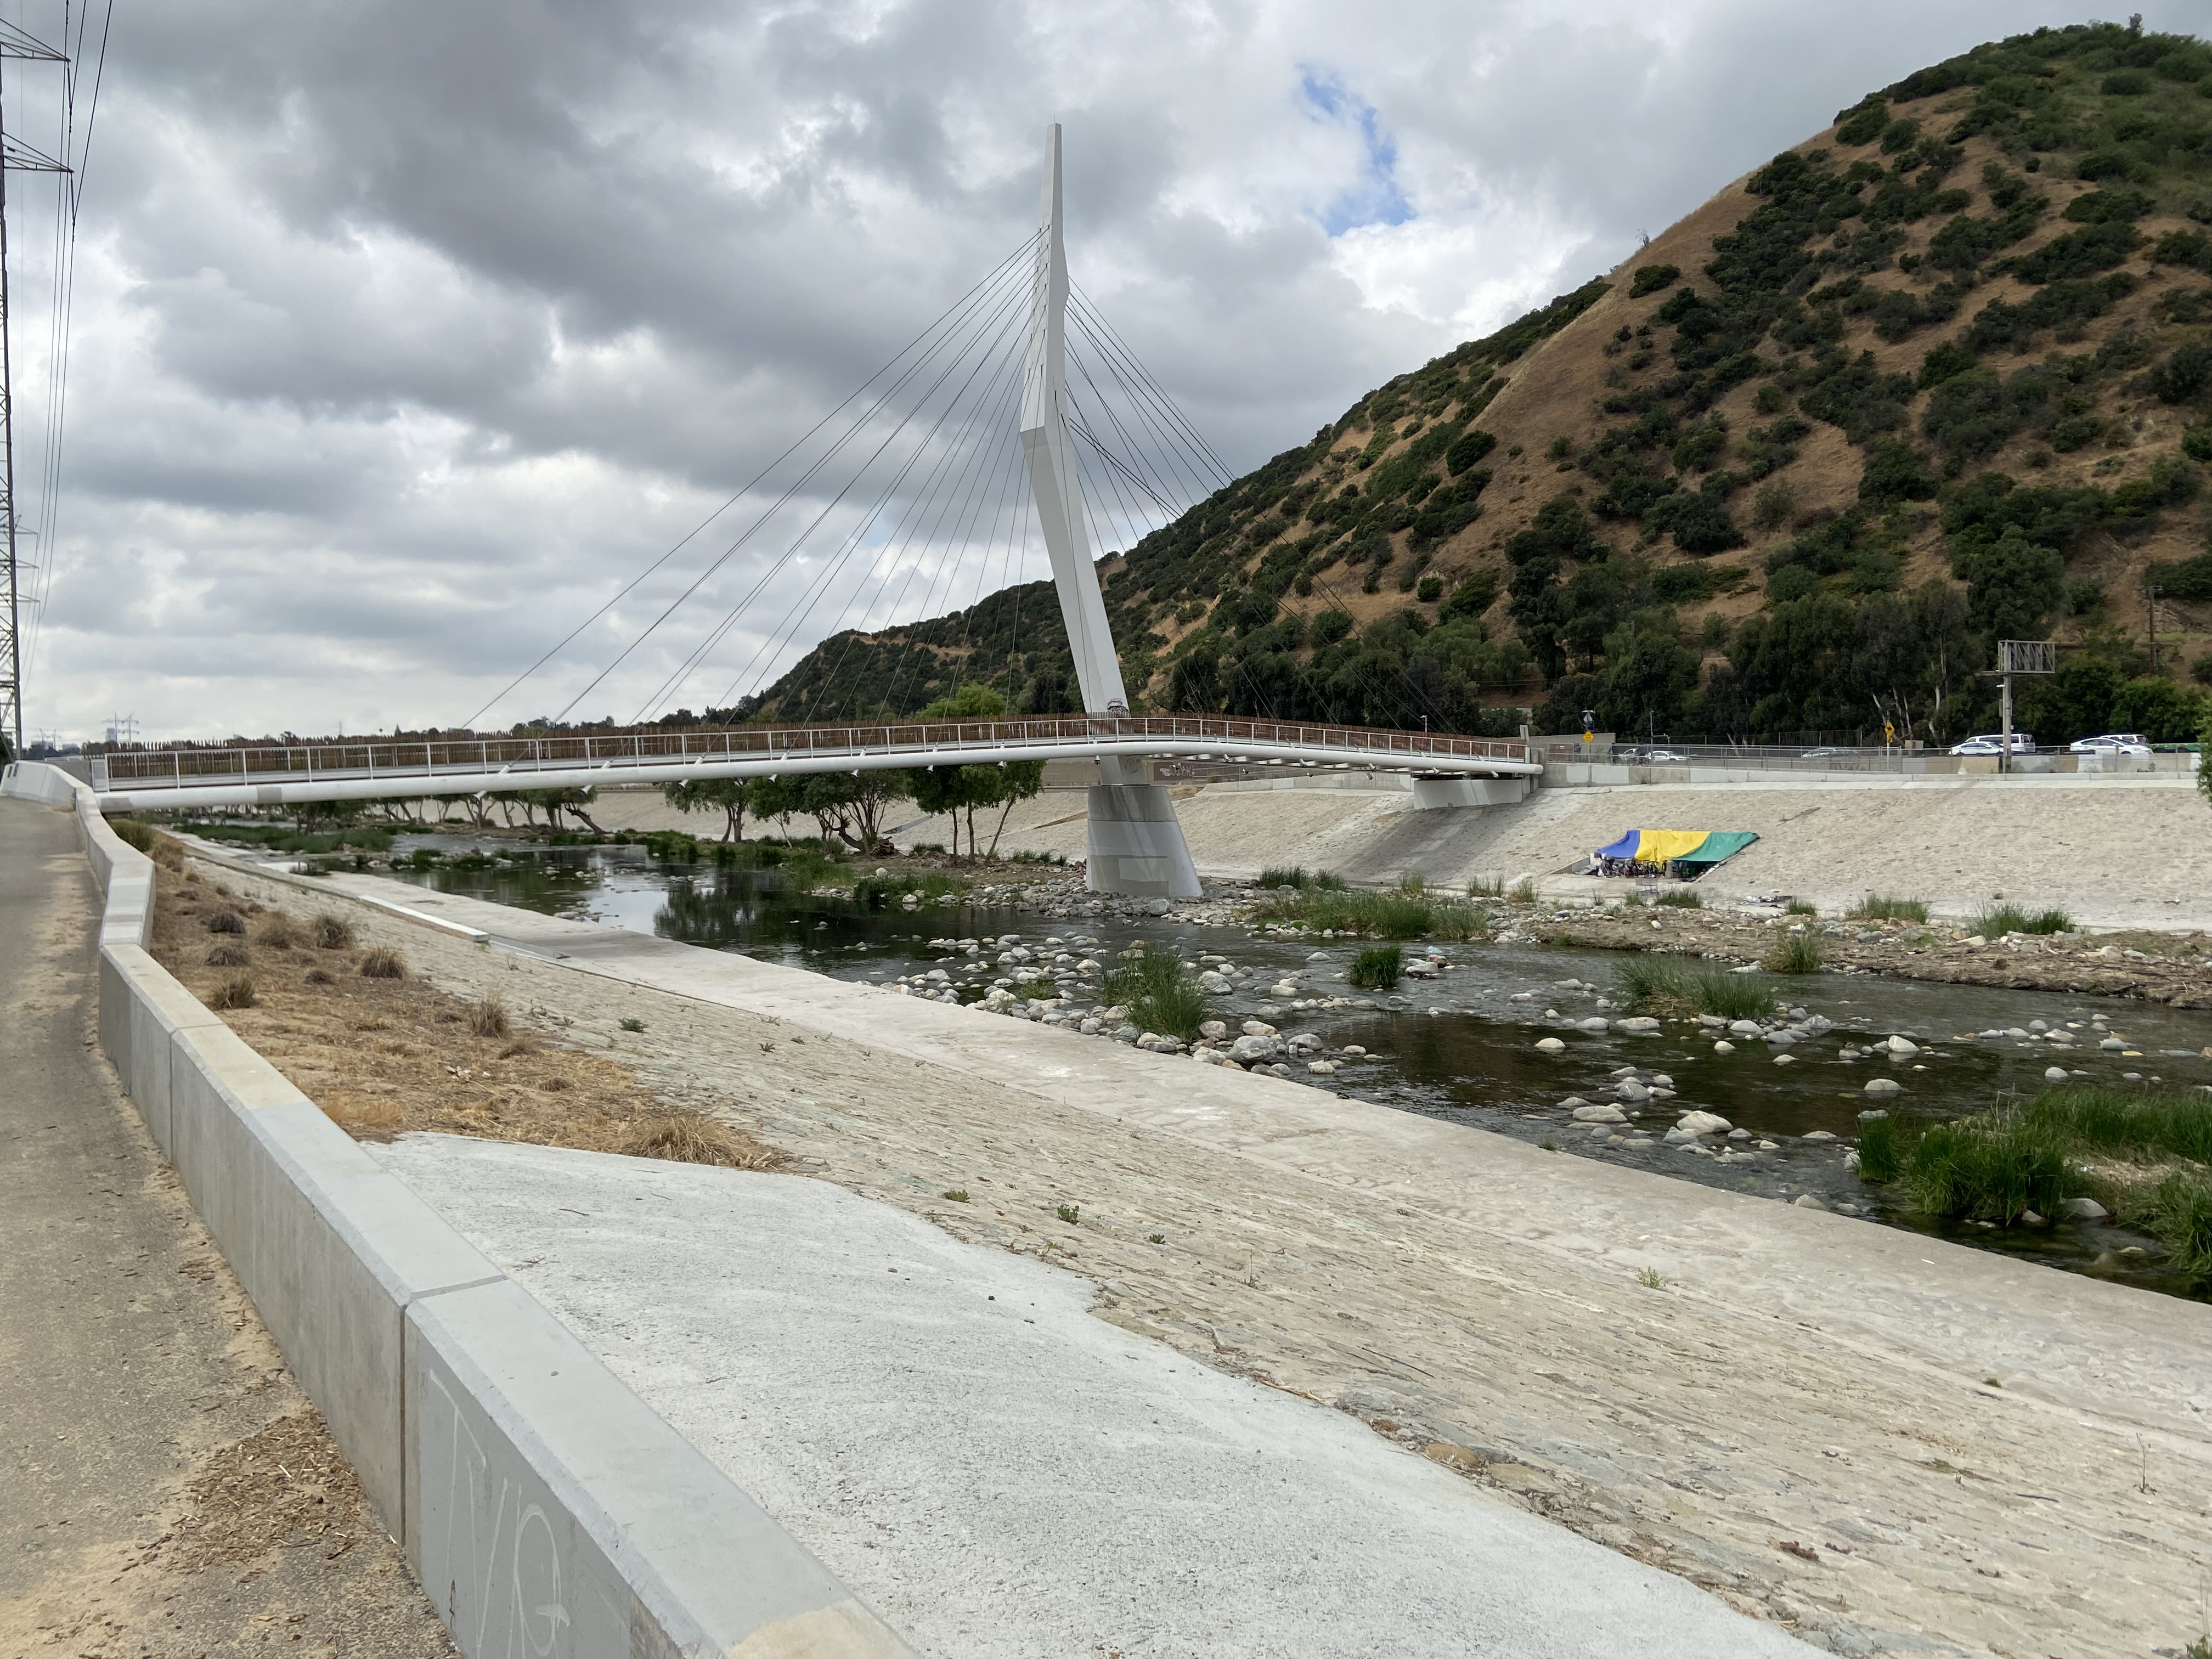 A suspension bridge crosses over the LA River, encased on either side by concrete barriers. Behind the bridge is a mountain dotted with green.